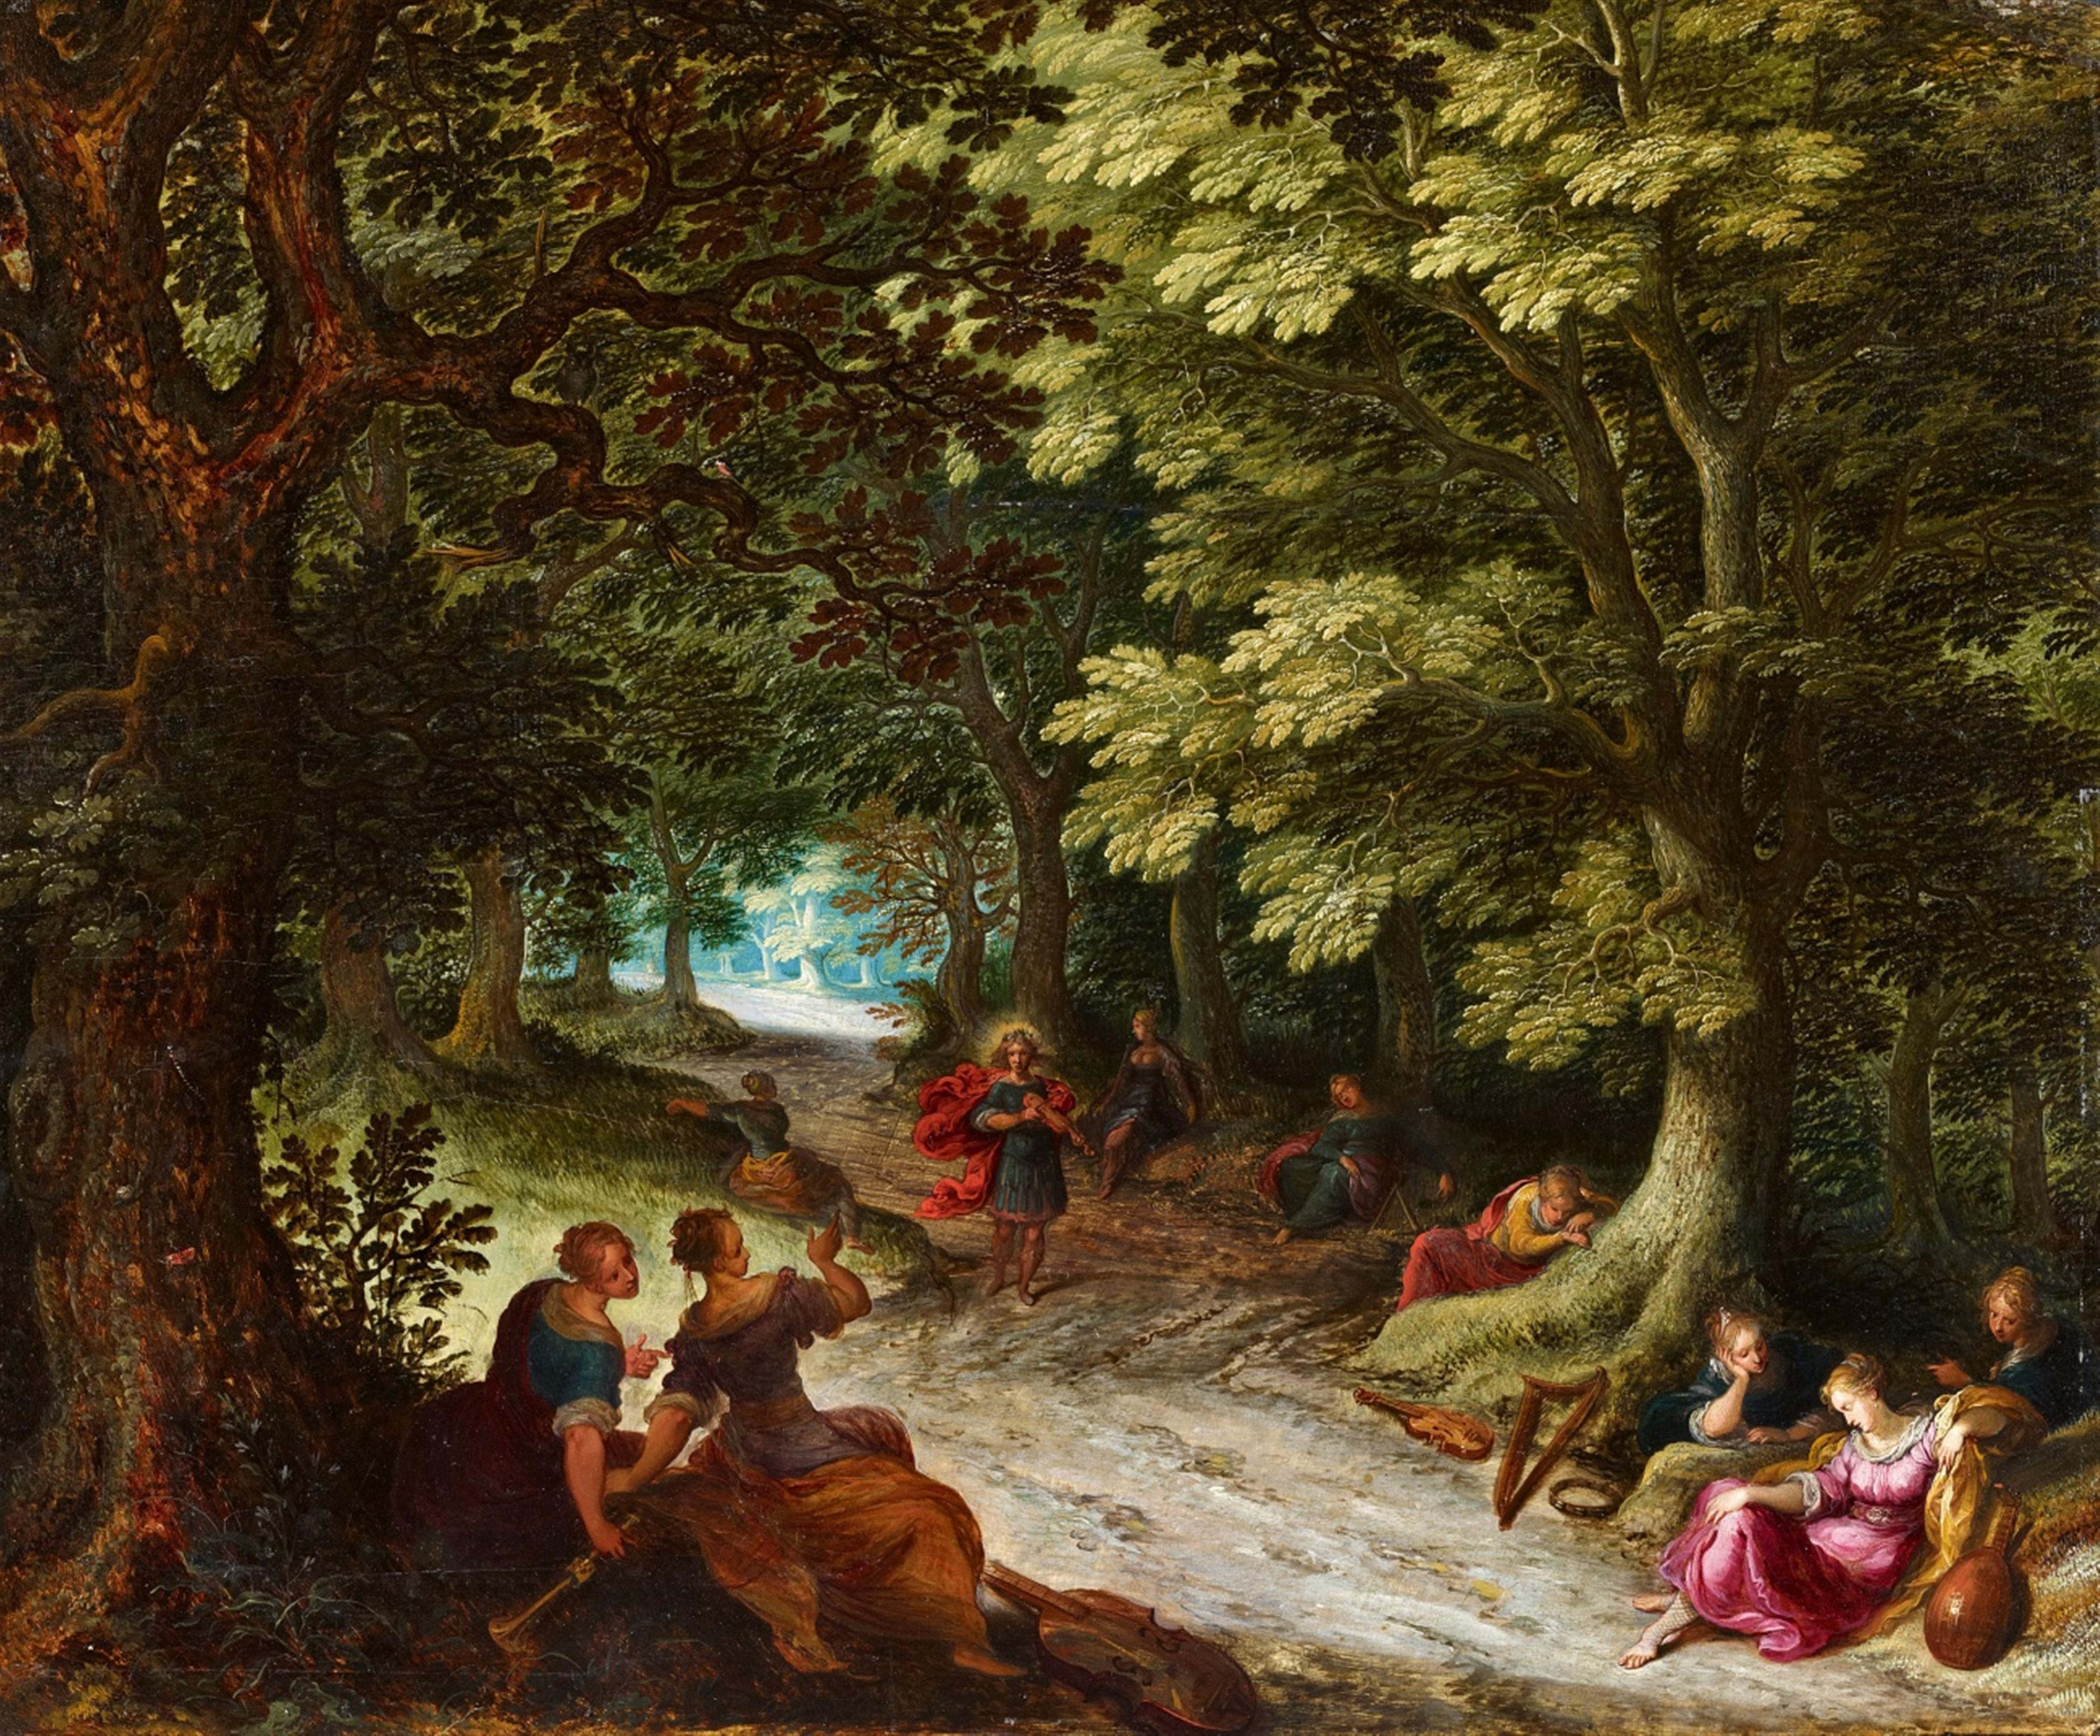 Frans Francken the Younger and studio
Abraham Govaerts and studio - Flemish Forest Landscape with Apollo and the Nine Muses - image-1